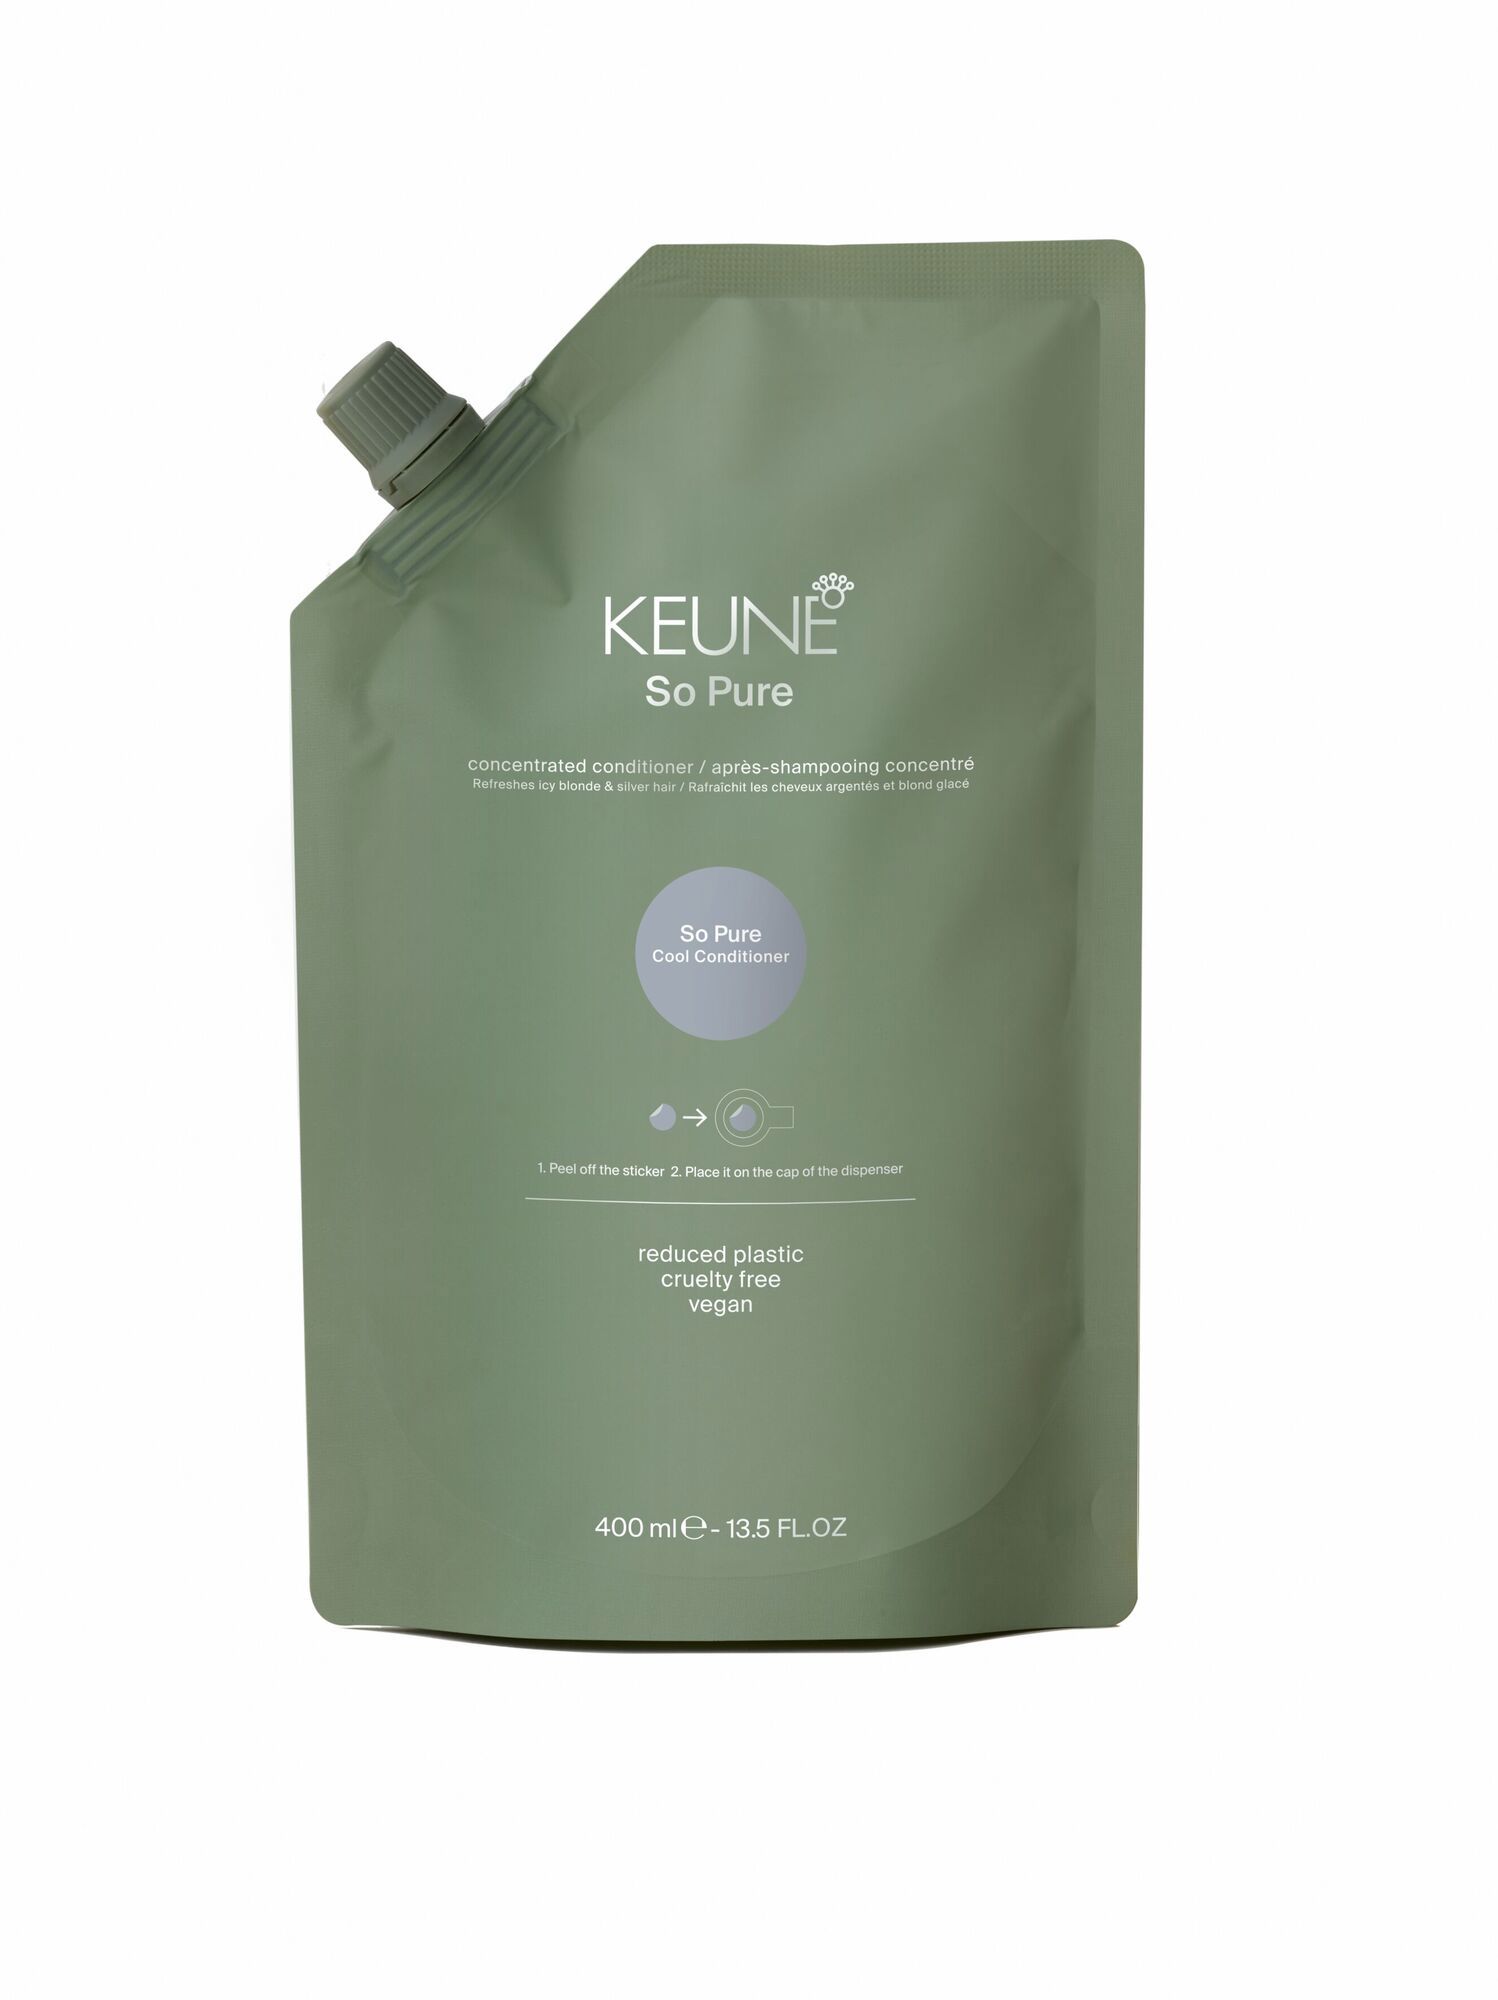 Vegan conditioner for stunning blond hair - So Pure Cool Conditioner Refill